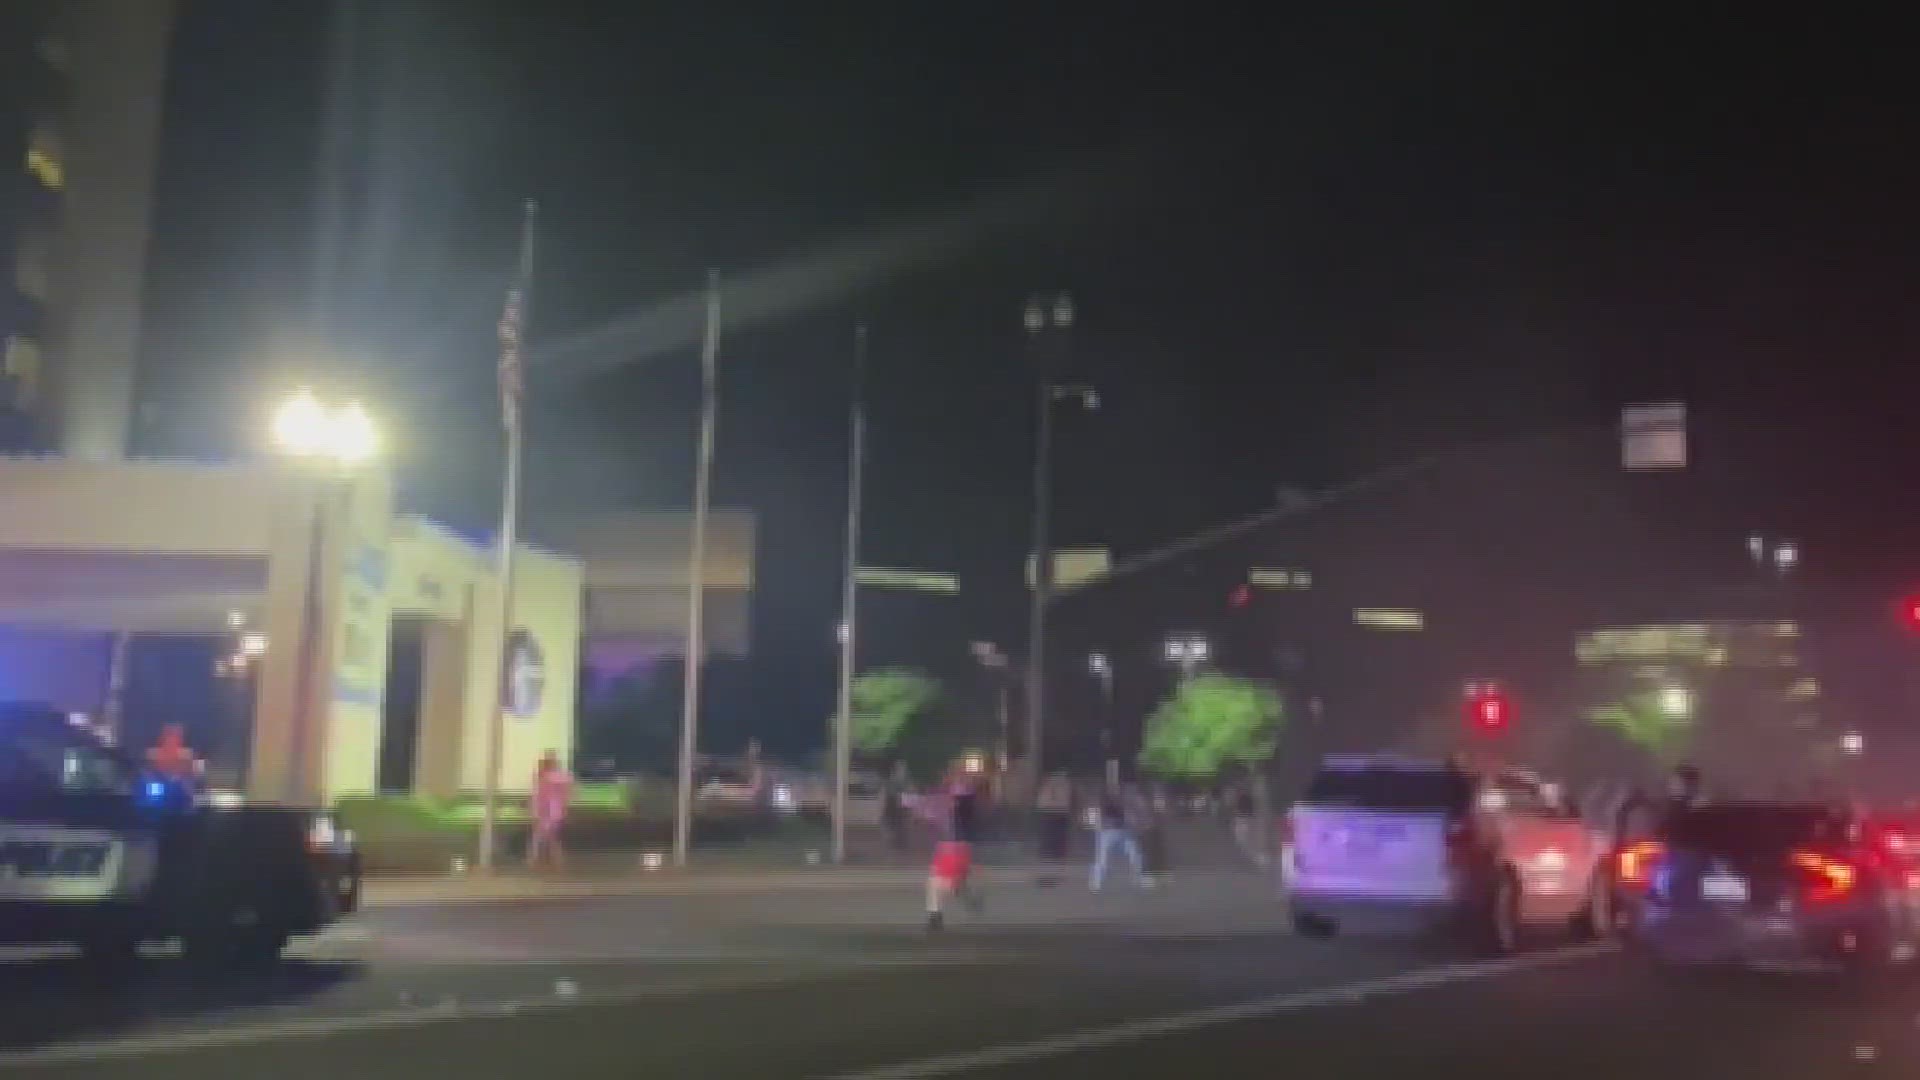 Sideshows in Stockton continue to cause unrest among neighbors and even left an officer with minor injuries as the police tried to break up the event.